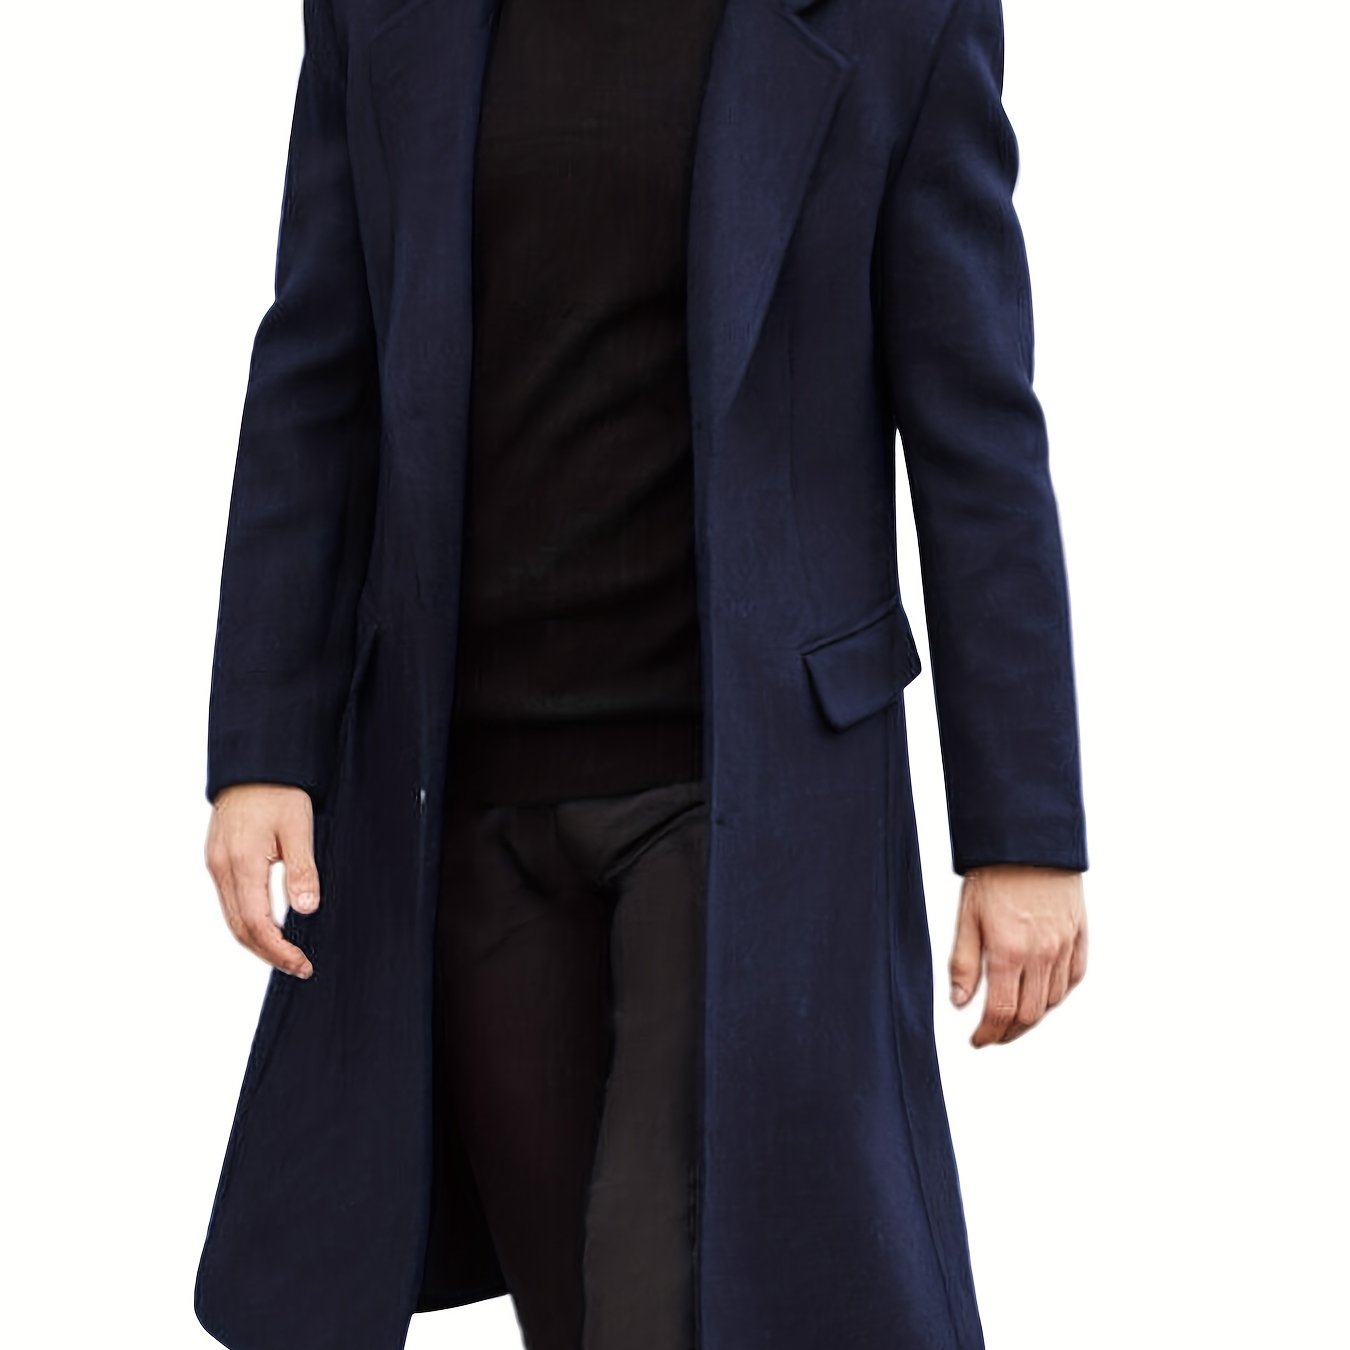 Plus Size Men's Fashion Fleece Coat For Autumn/winter, Double-breasted  Lapel Coat, Mid-length Windbreaker For Big & Tall Males